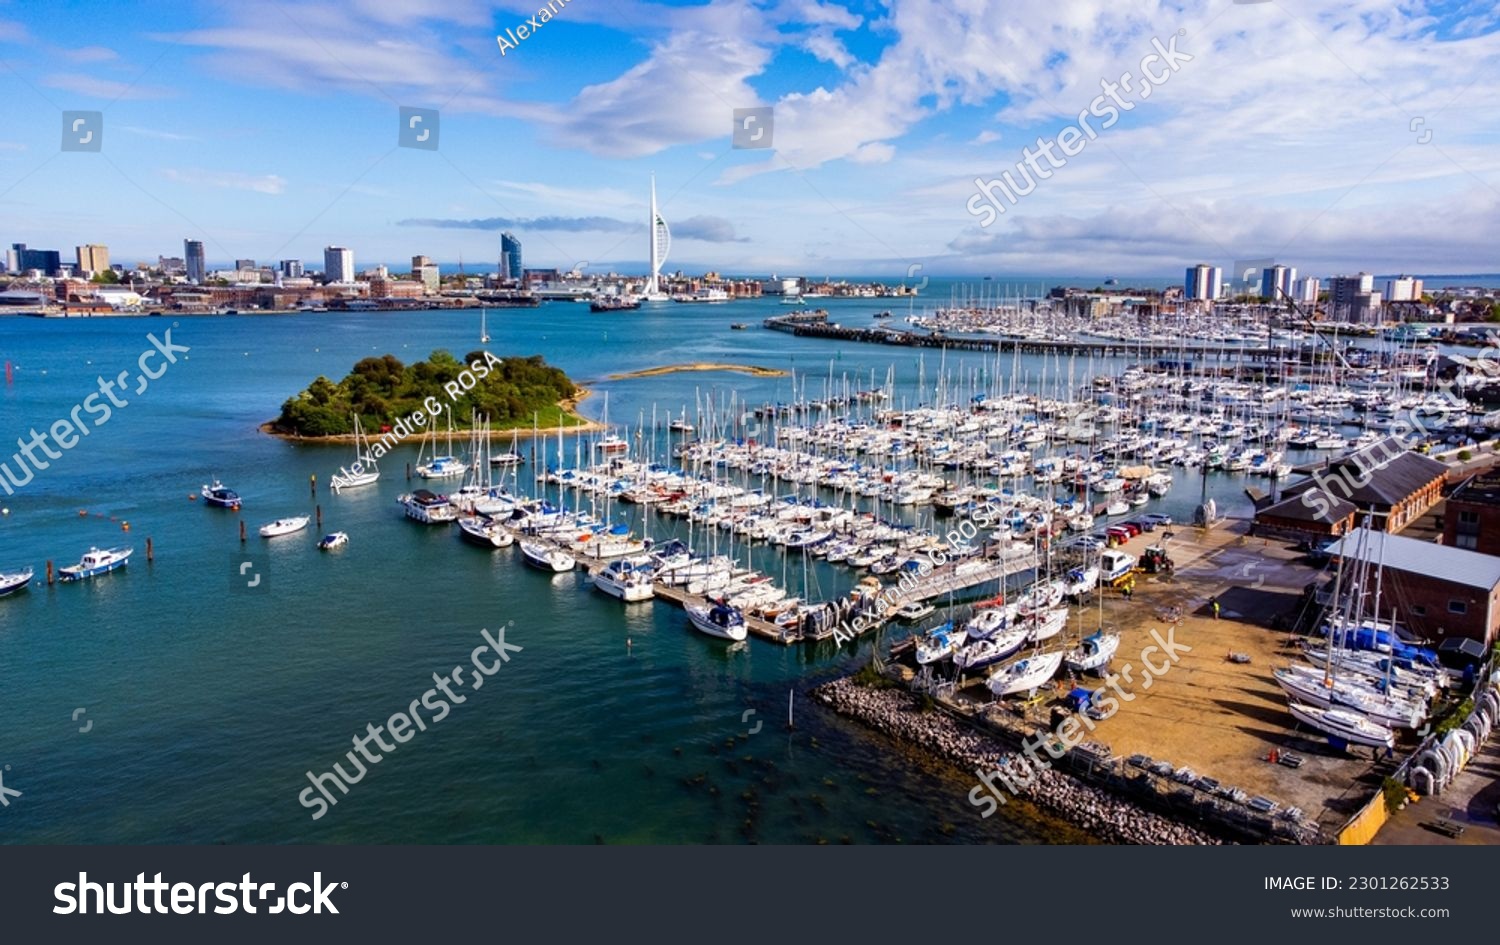 Aerial view of the Marina of Gosport behind Burrow Island in Portsmouth Harbor in the south of England on the Channel coast #2301262533